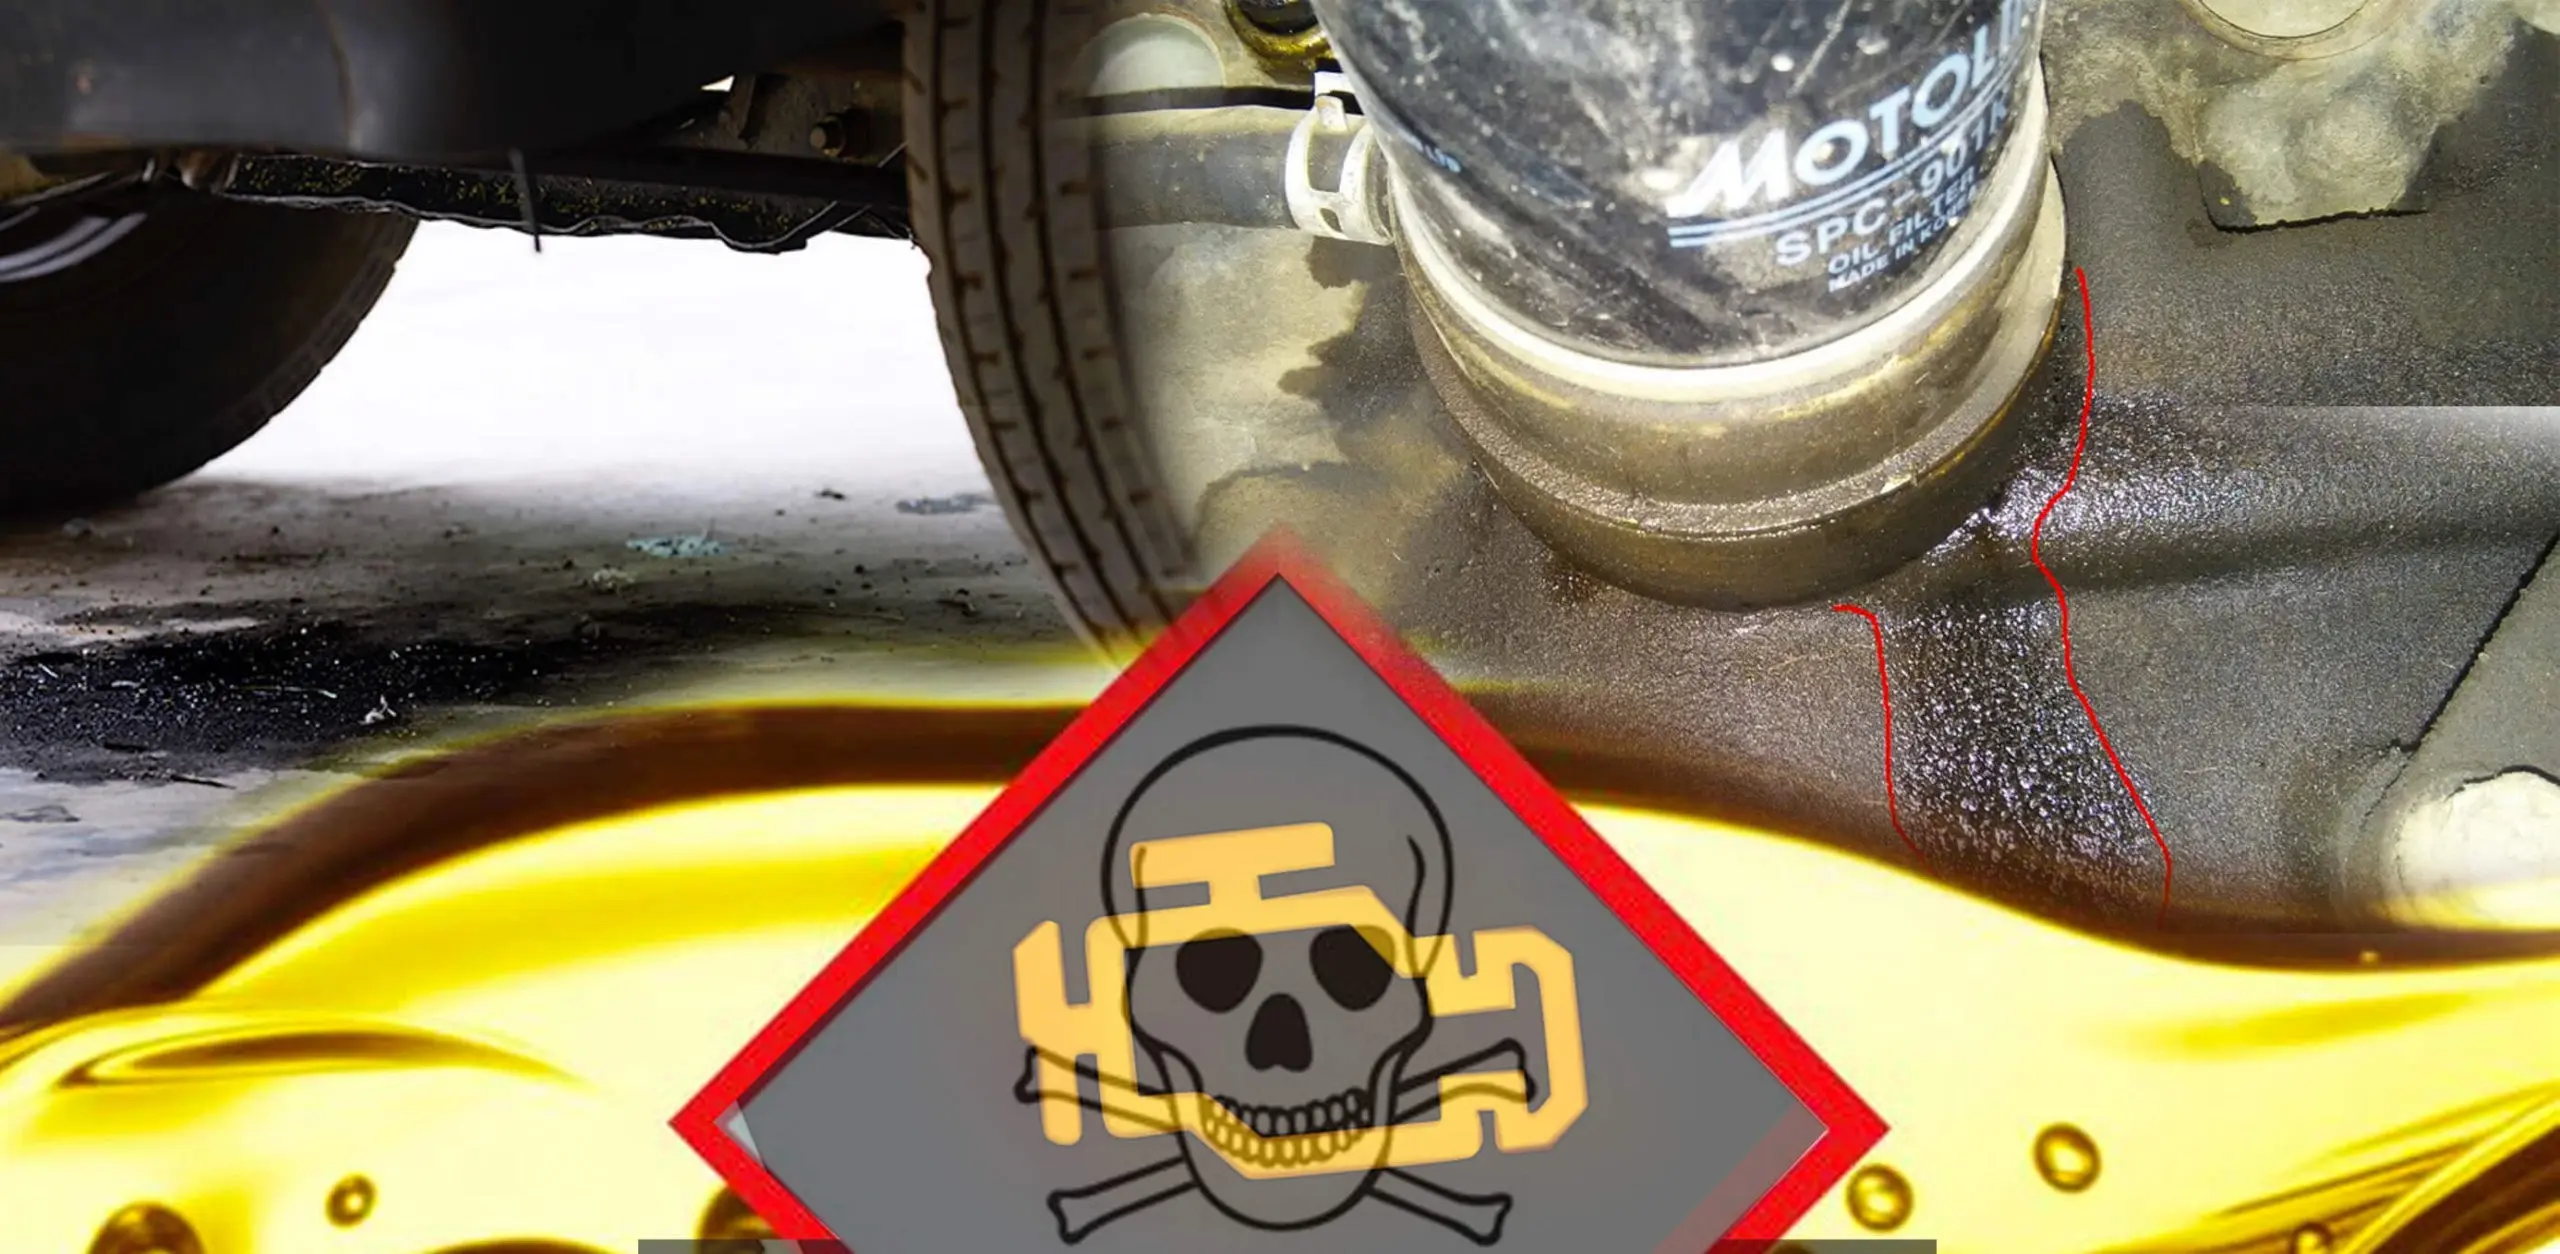 Leak sign or safety warning sign from car exhaust system